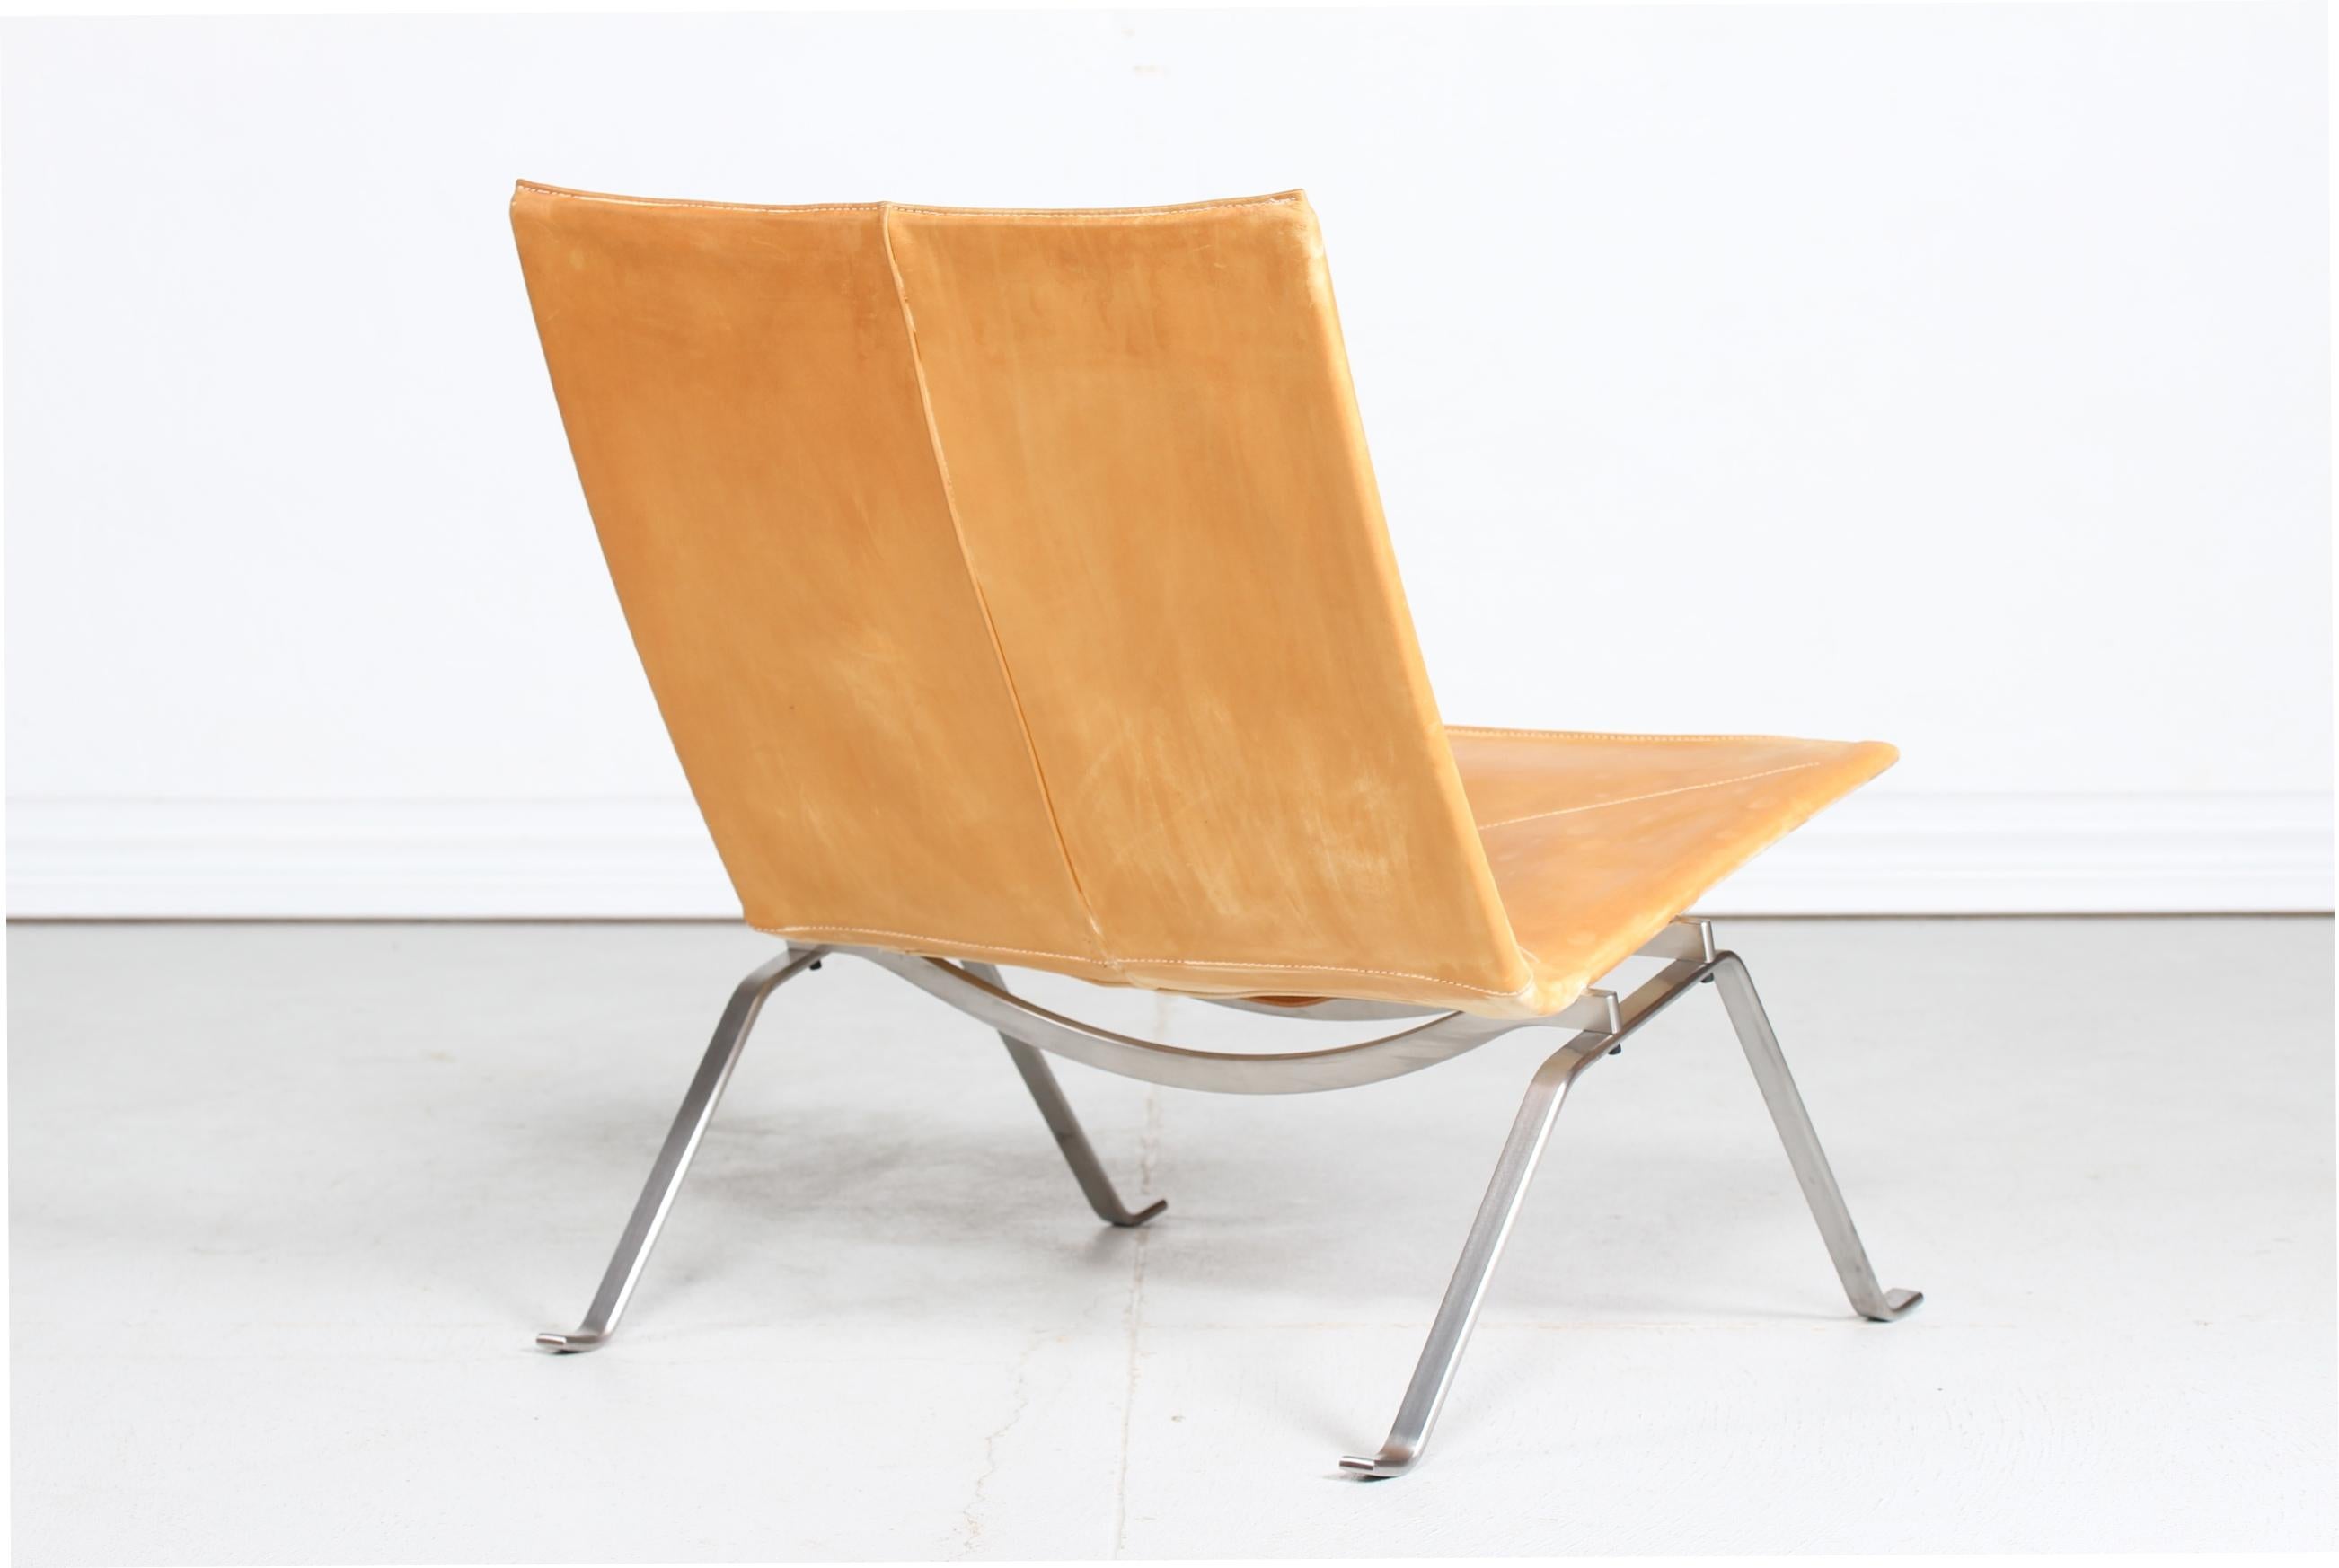 Mid-Century Modern Poul Kjærholm PK 22 Lounge Chair with Cognac Leather by Fritz Hansen, 2001